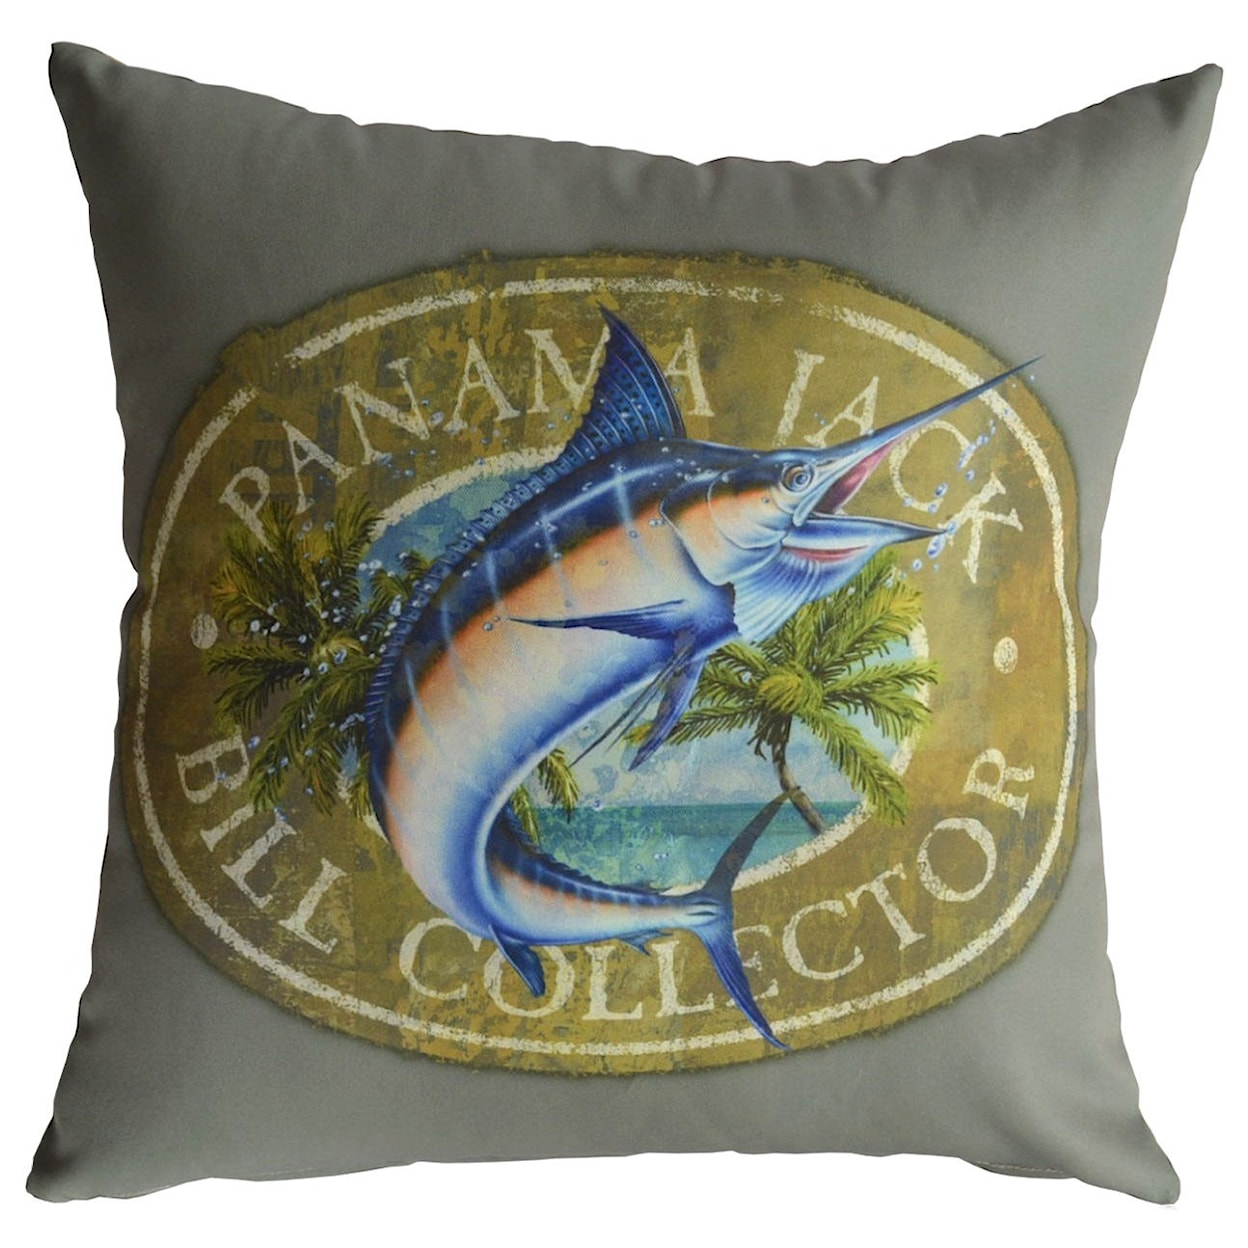 Pelican Reef Panama Jack Pillows and Ottomans Bill Collector Throw Pillow